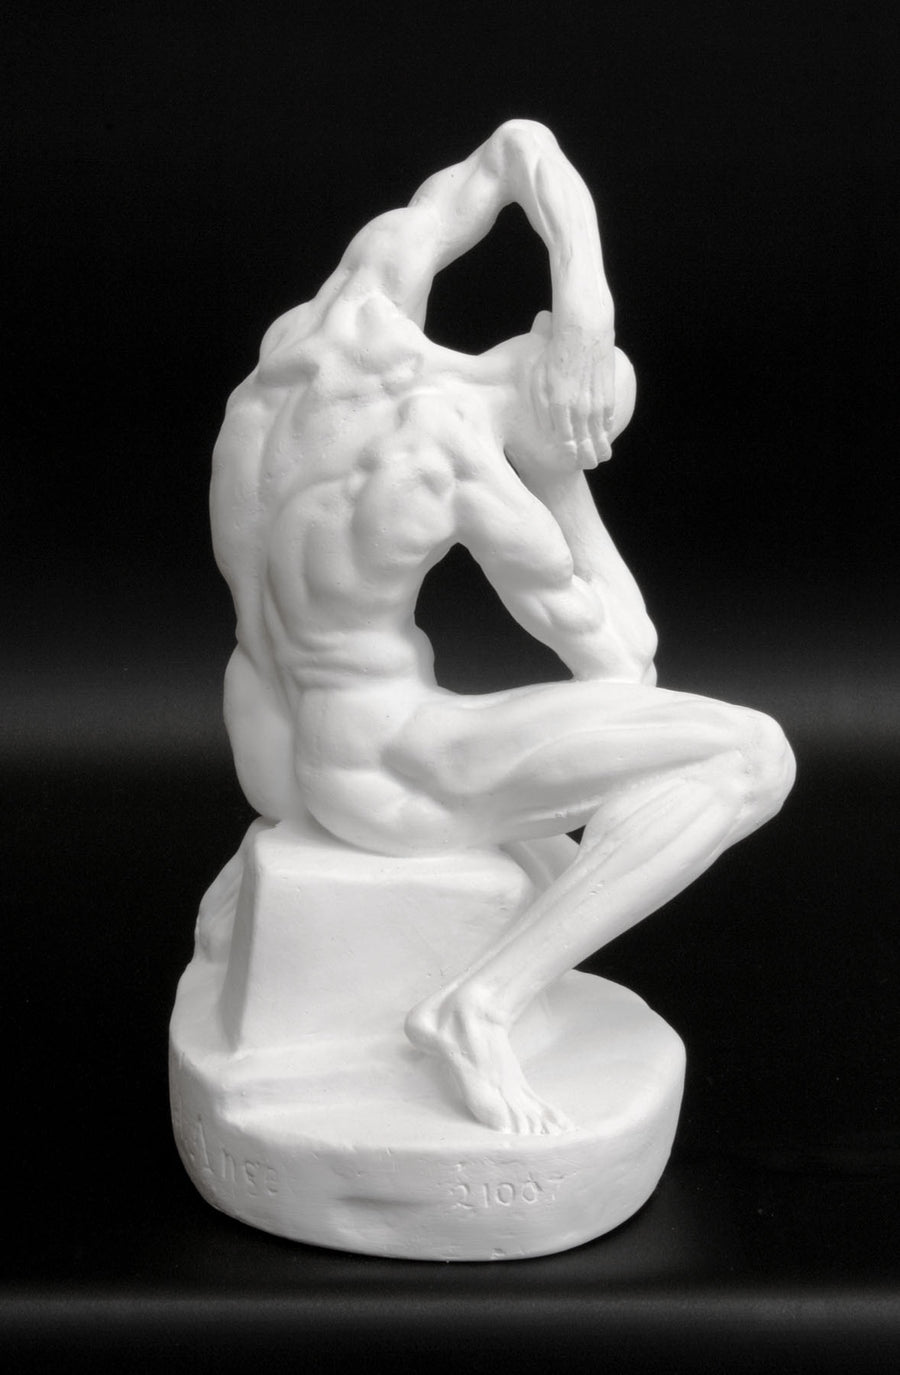 Photo of plaster cast sculpture of flayed man kneeling with hands on head on black background